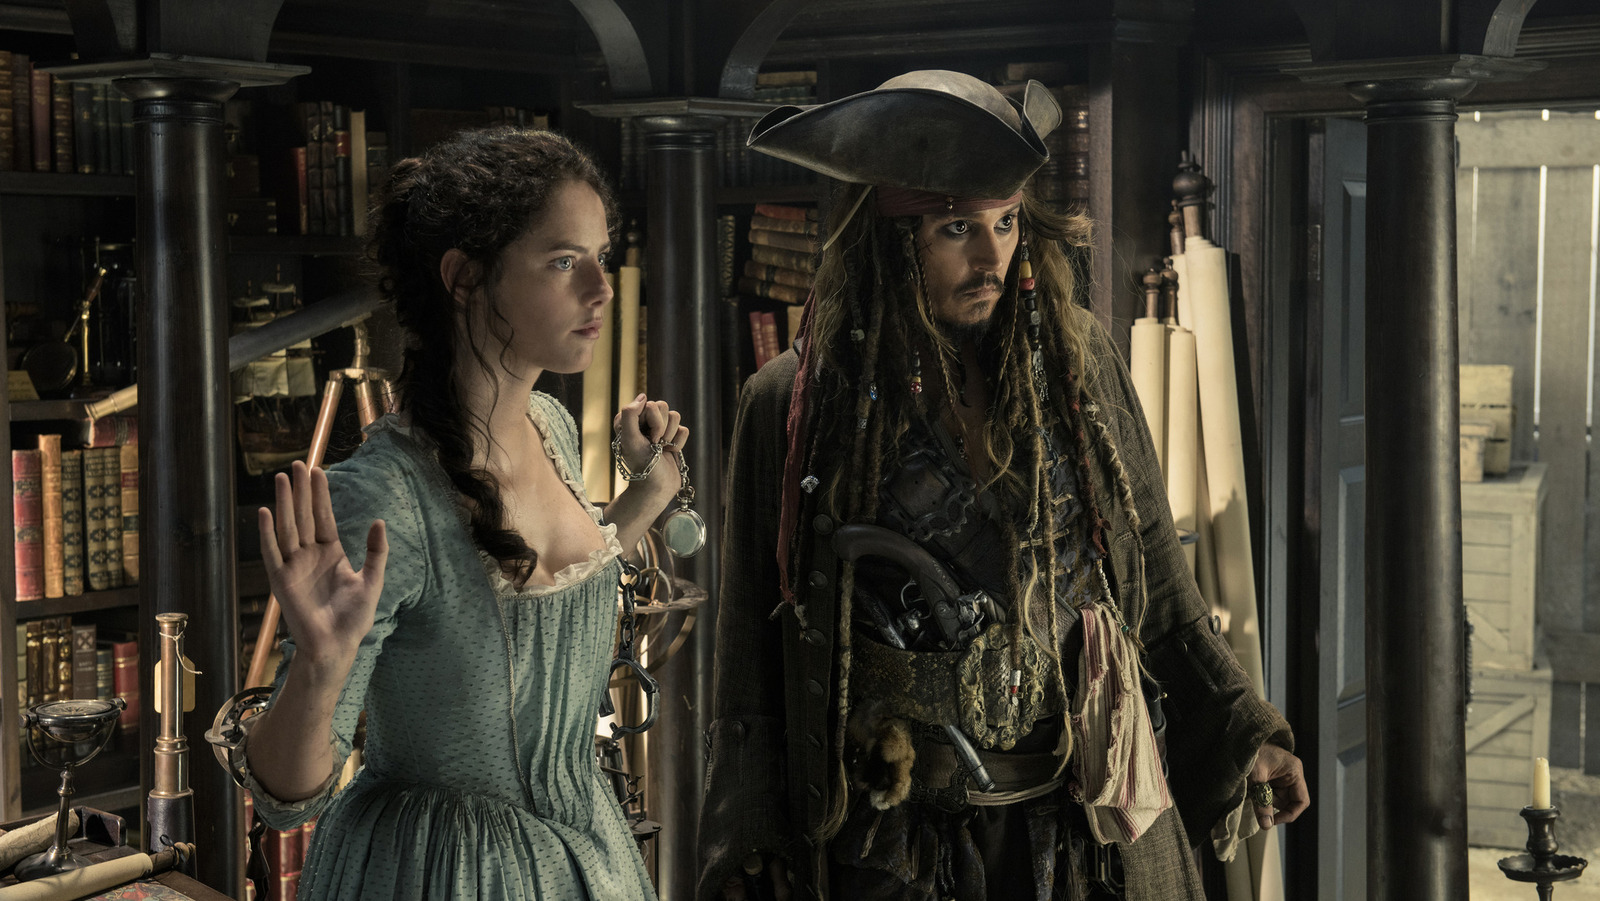 Disney’s Next Pirates Of The Caribbean Movie Will Be A Total Reboot, Apparently